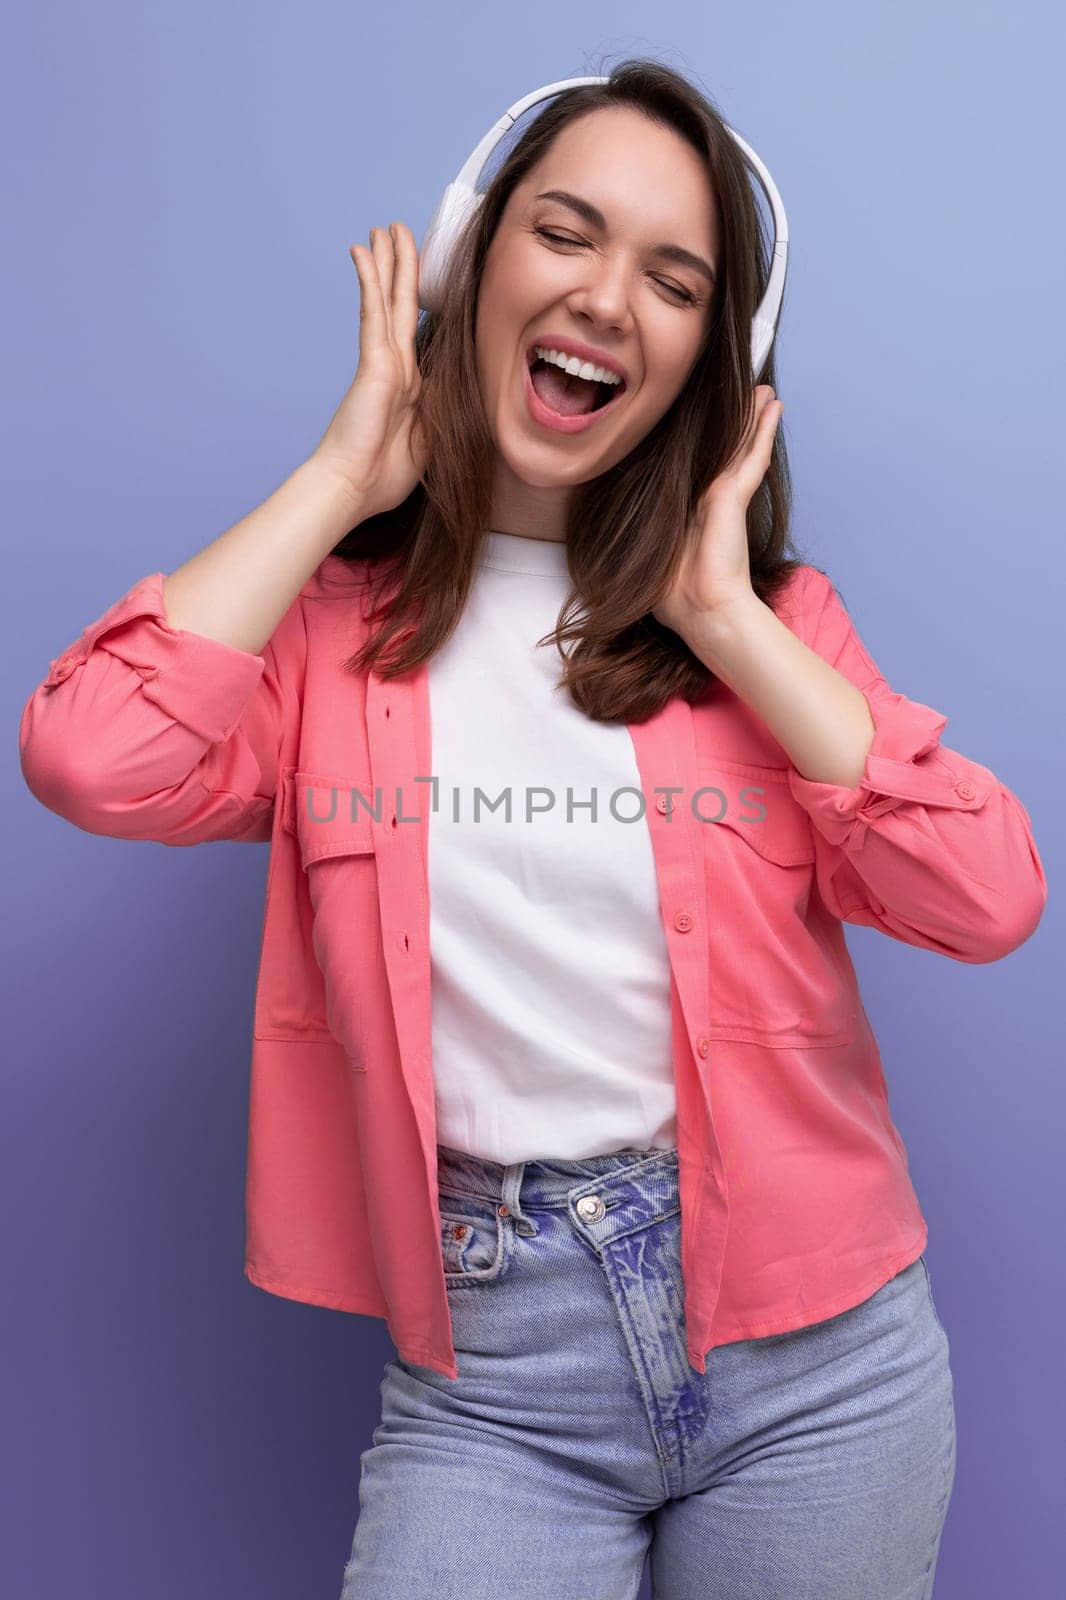 energetic brunette young woman in a shirt and jeans dances to the music from wireless headphones.